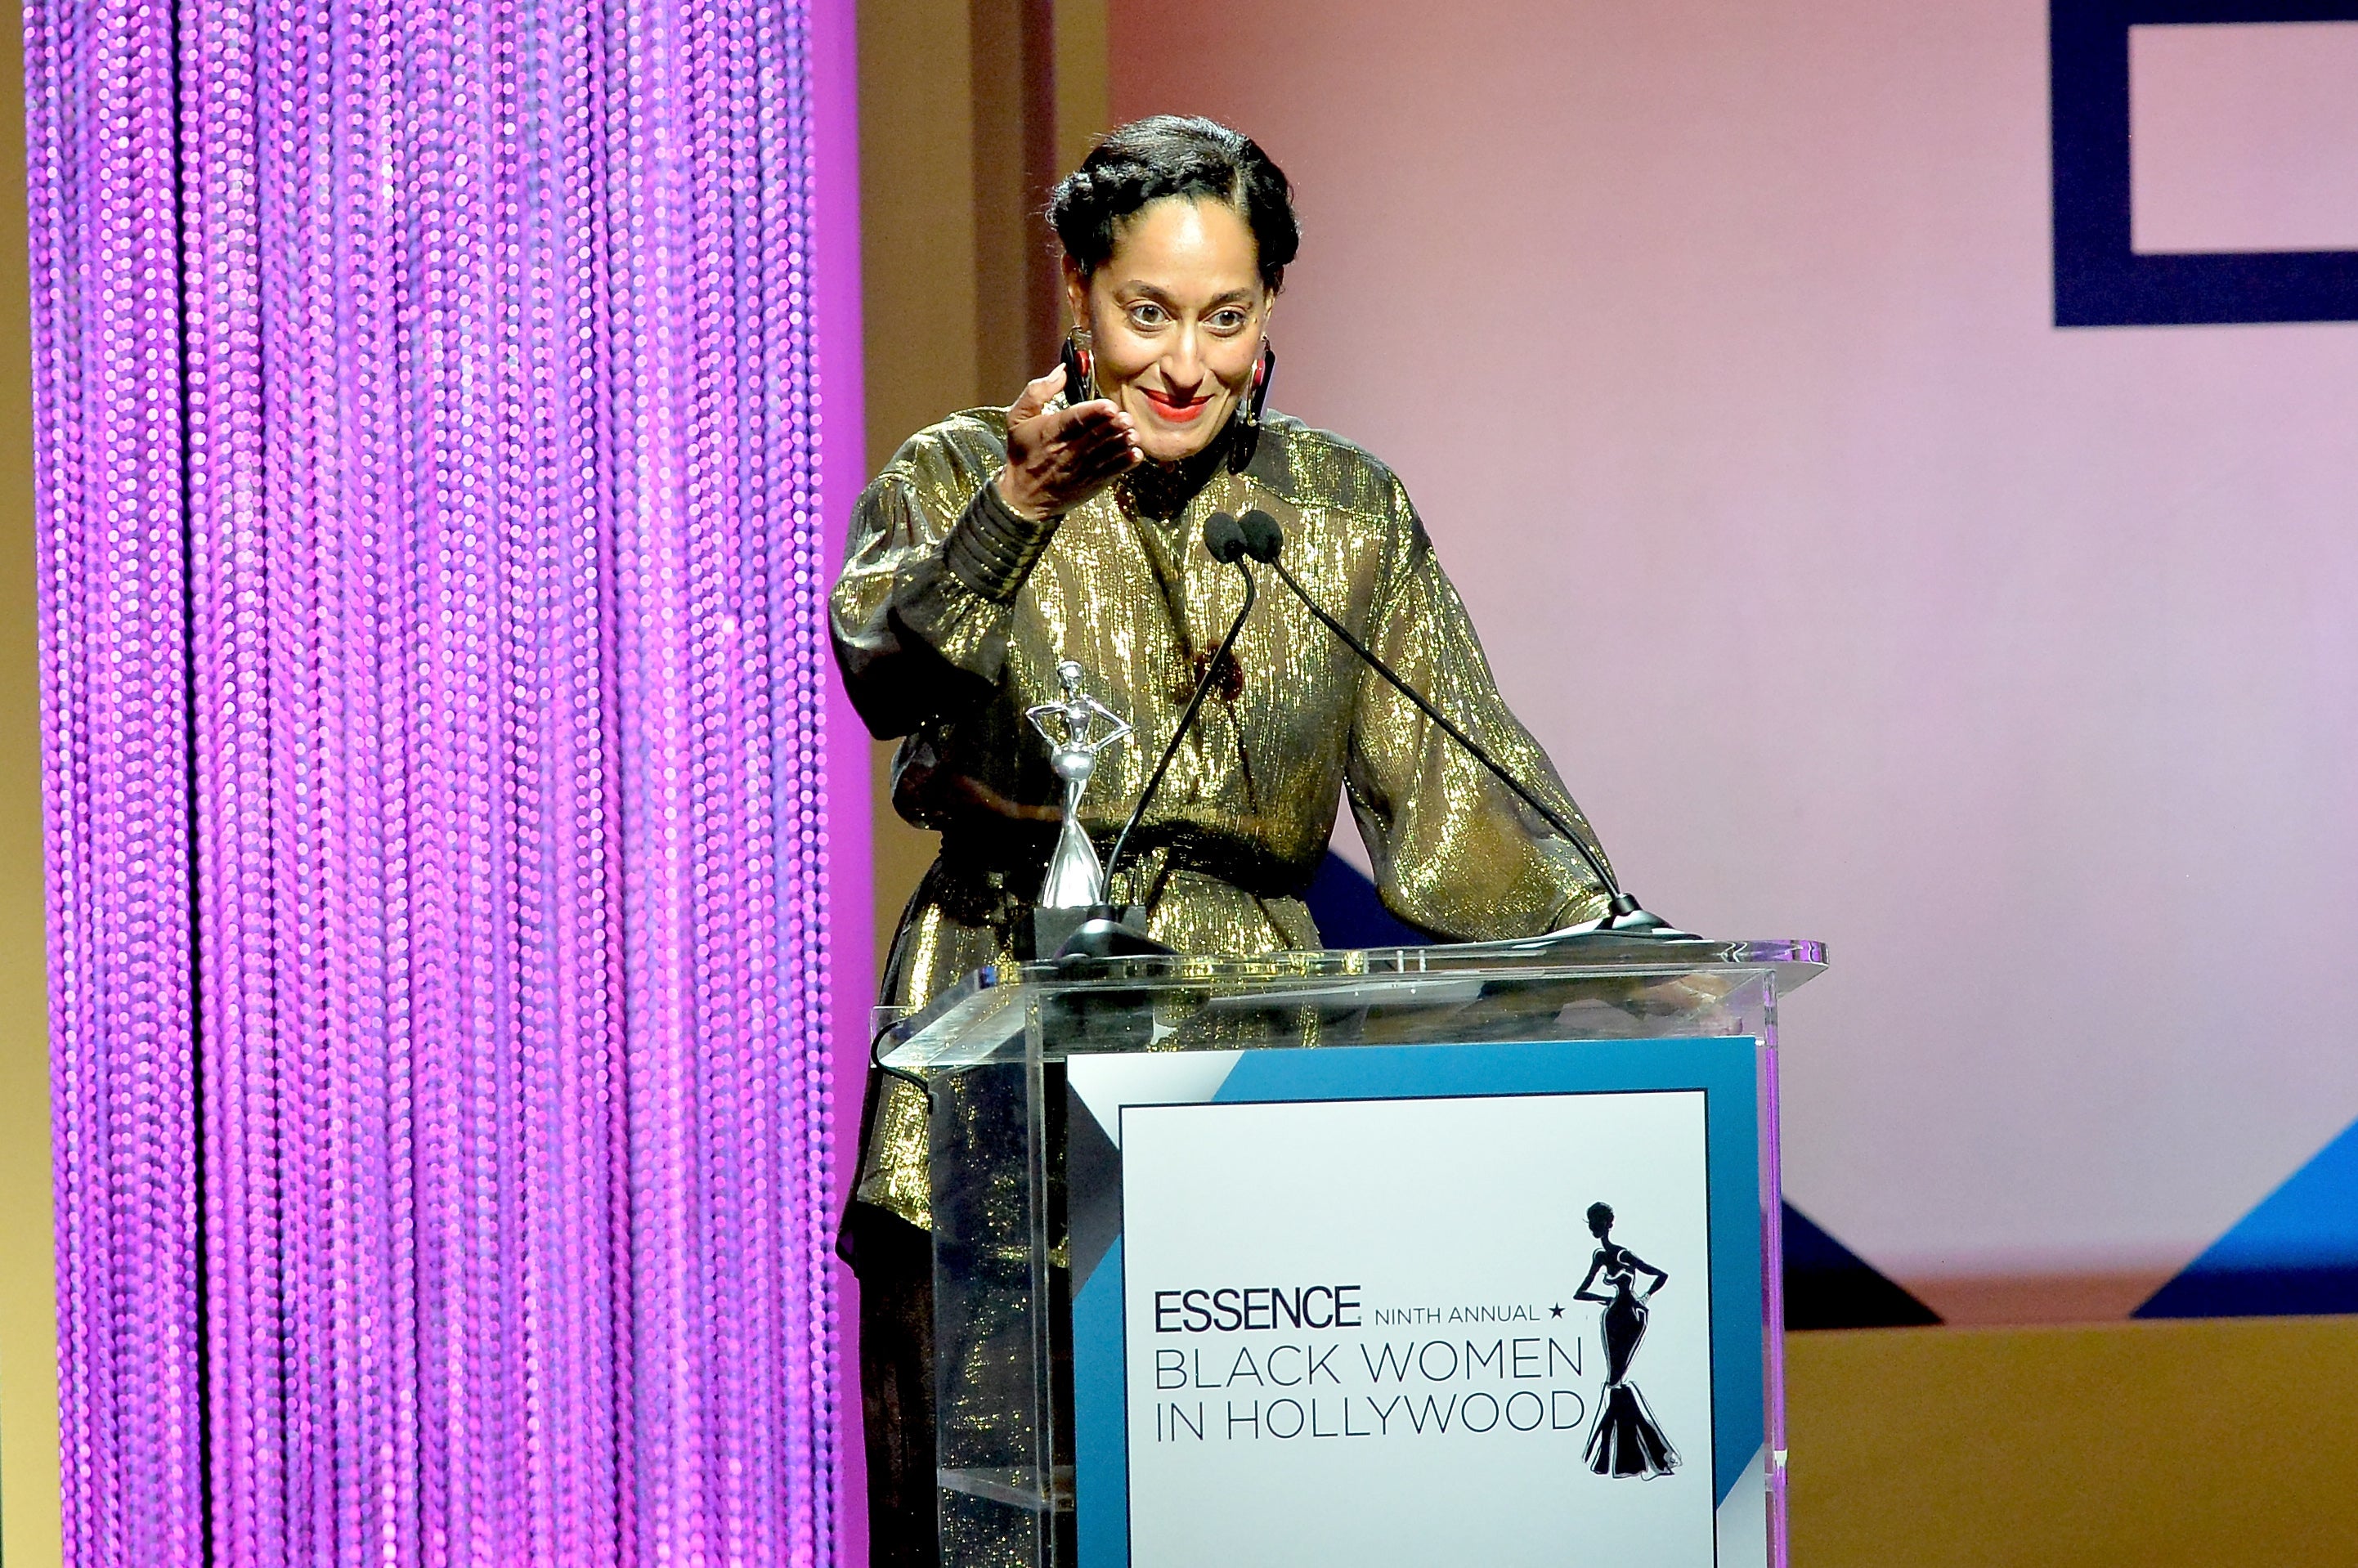 Tracee Ellis Ross Talks Confronting Fear and Being Her Authentic Self
